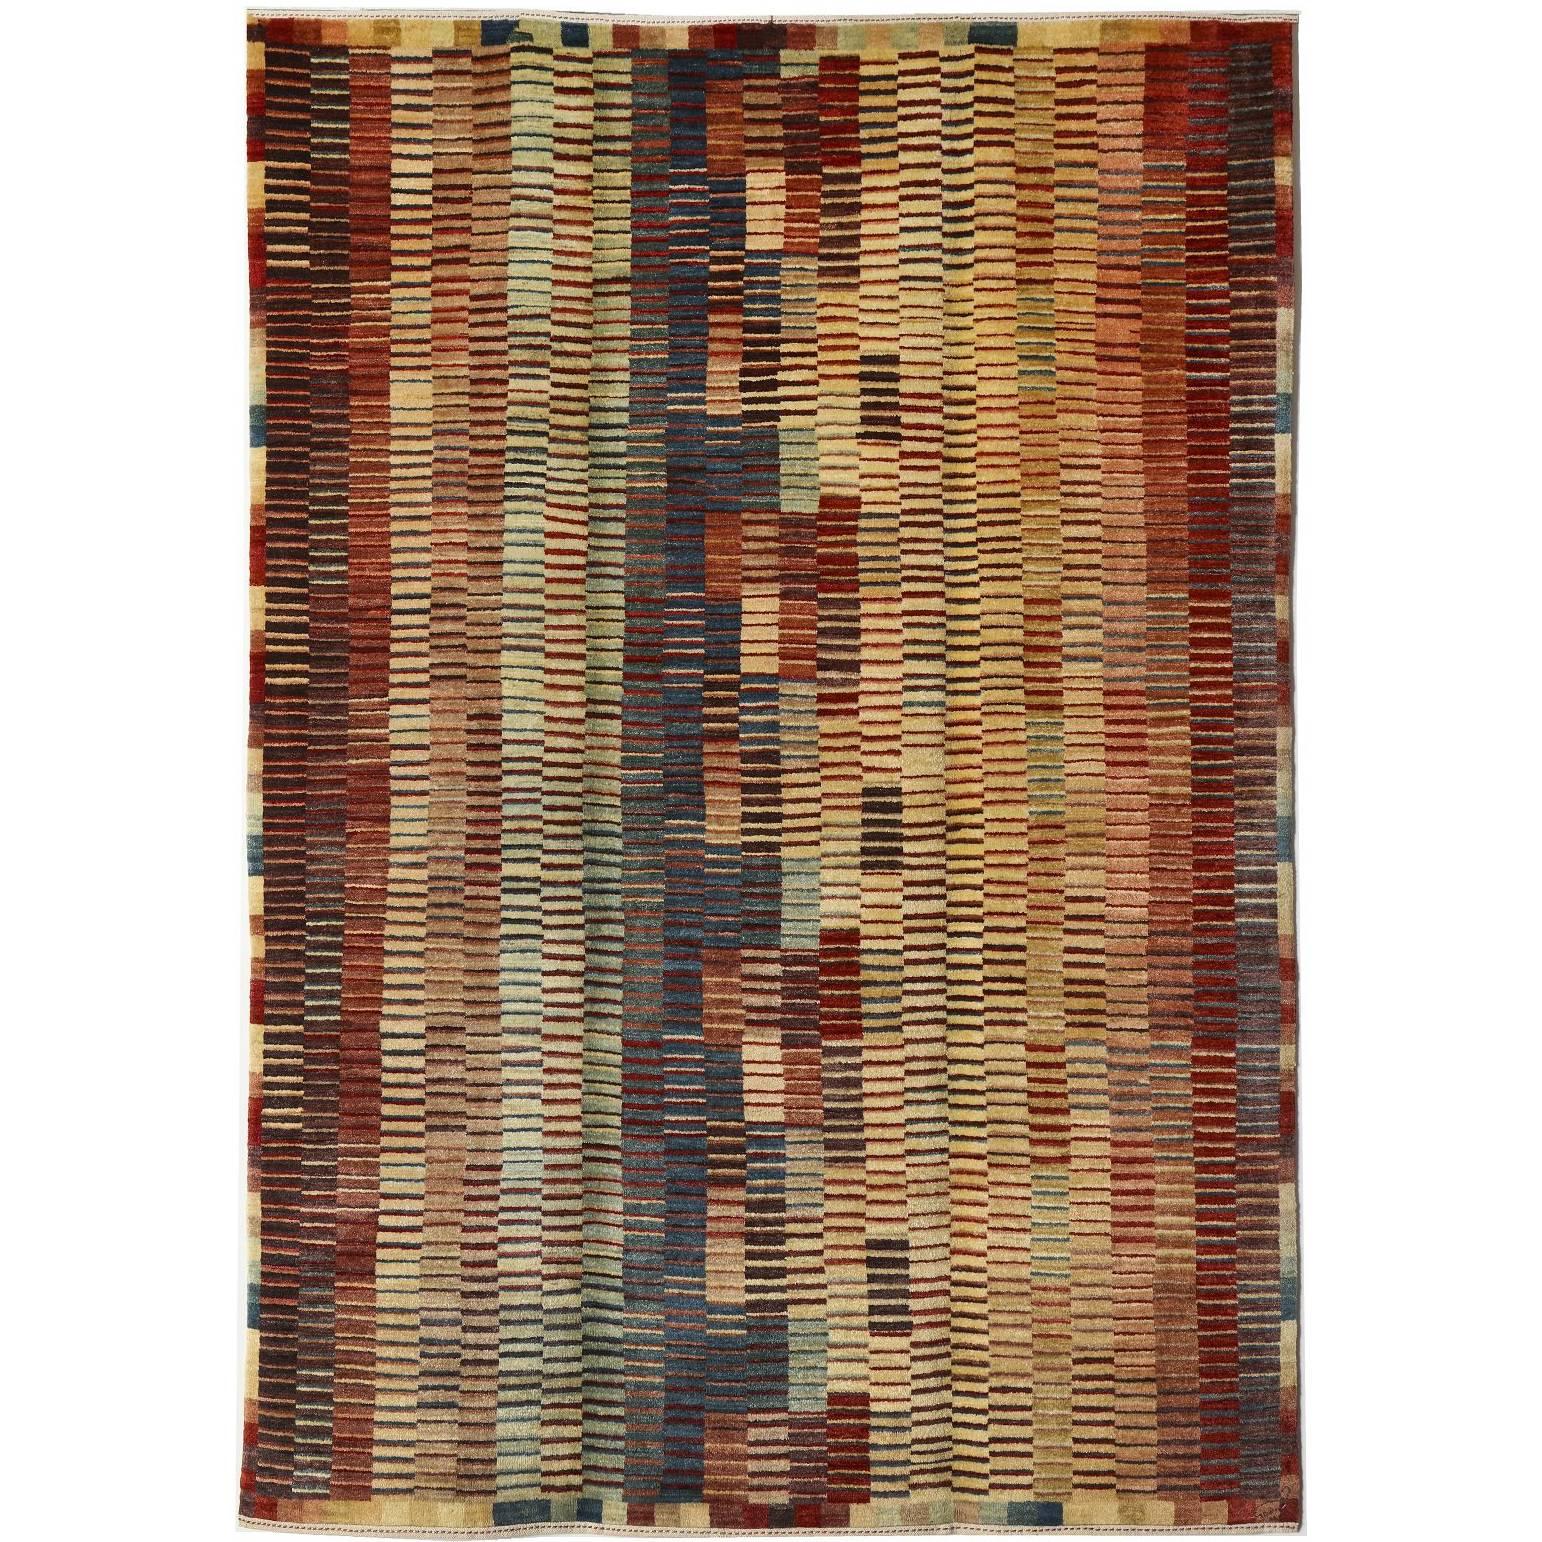 Orley Shabahang Signature Carpet in Handspun Wool and Vegetable Dyes